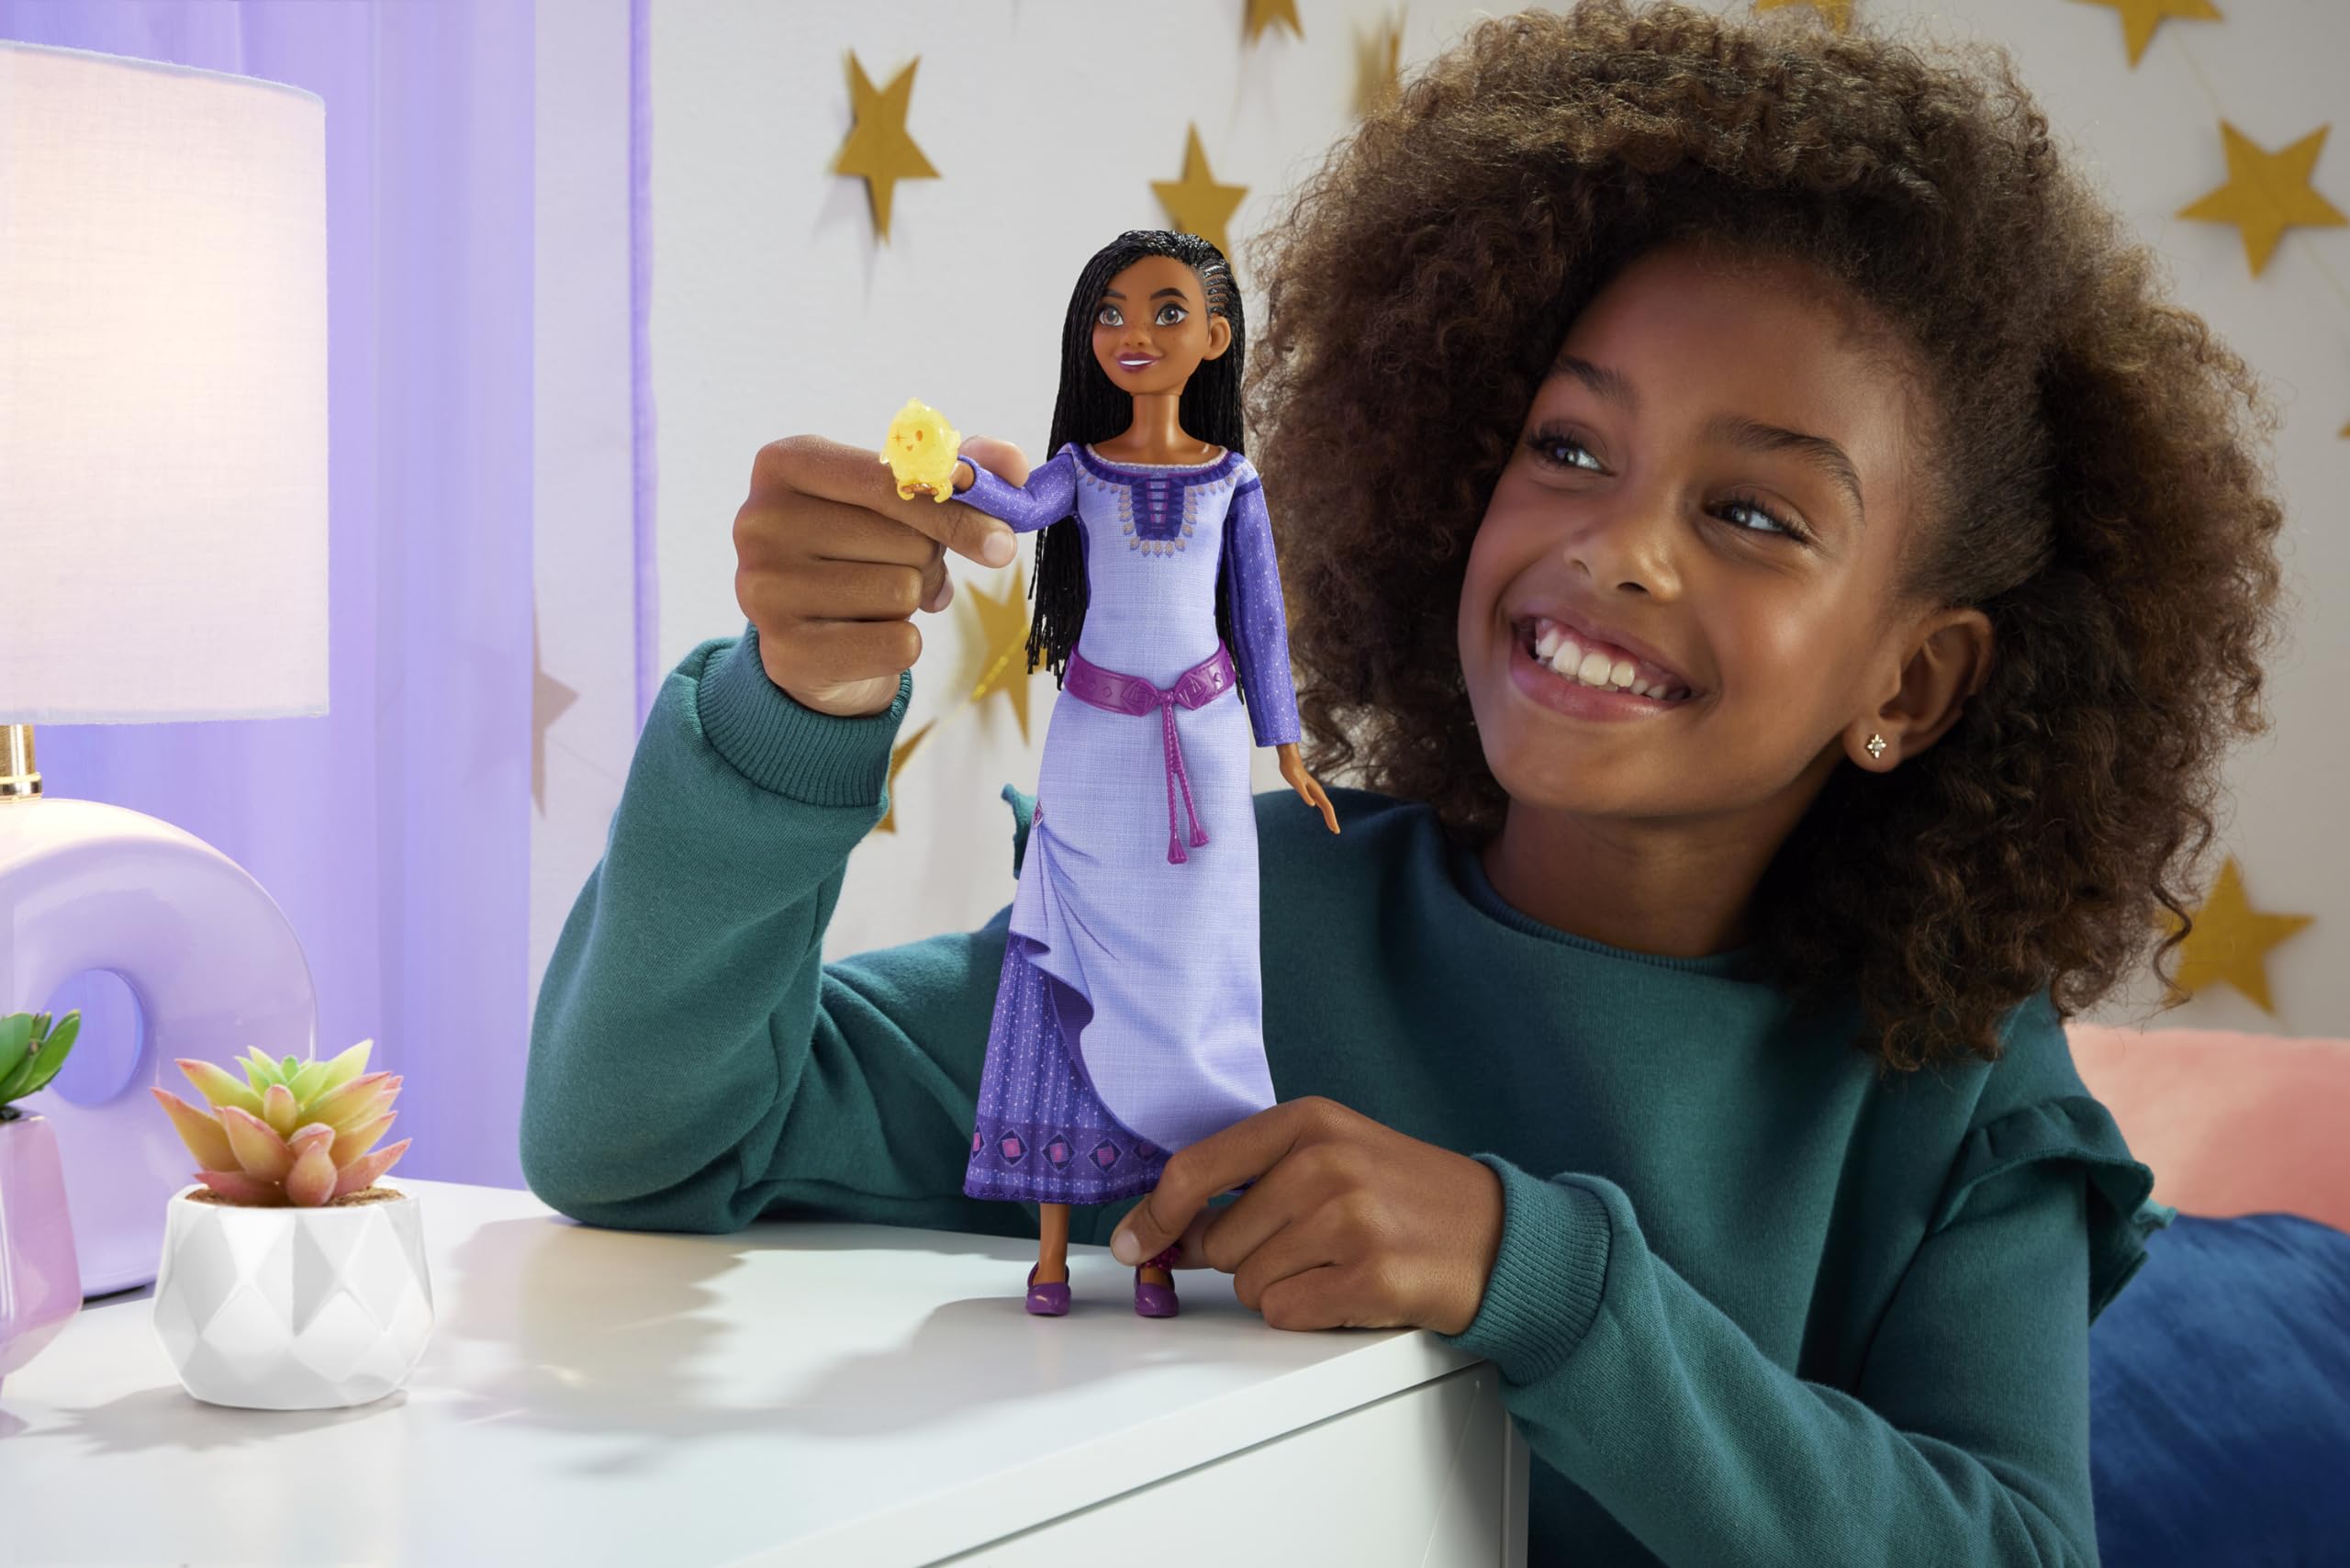 Mattel Disney's Wish Singing Asha of Rosas Fashion Doll & Star Figure, Posable with Removable Outfit, Sings “This Wish” in English